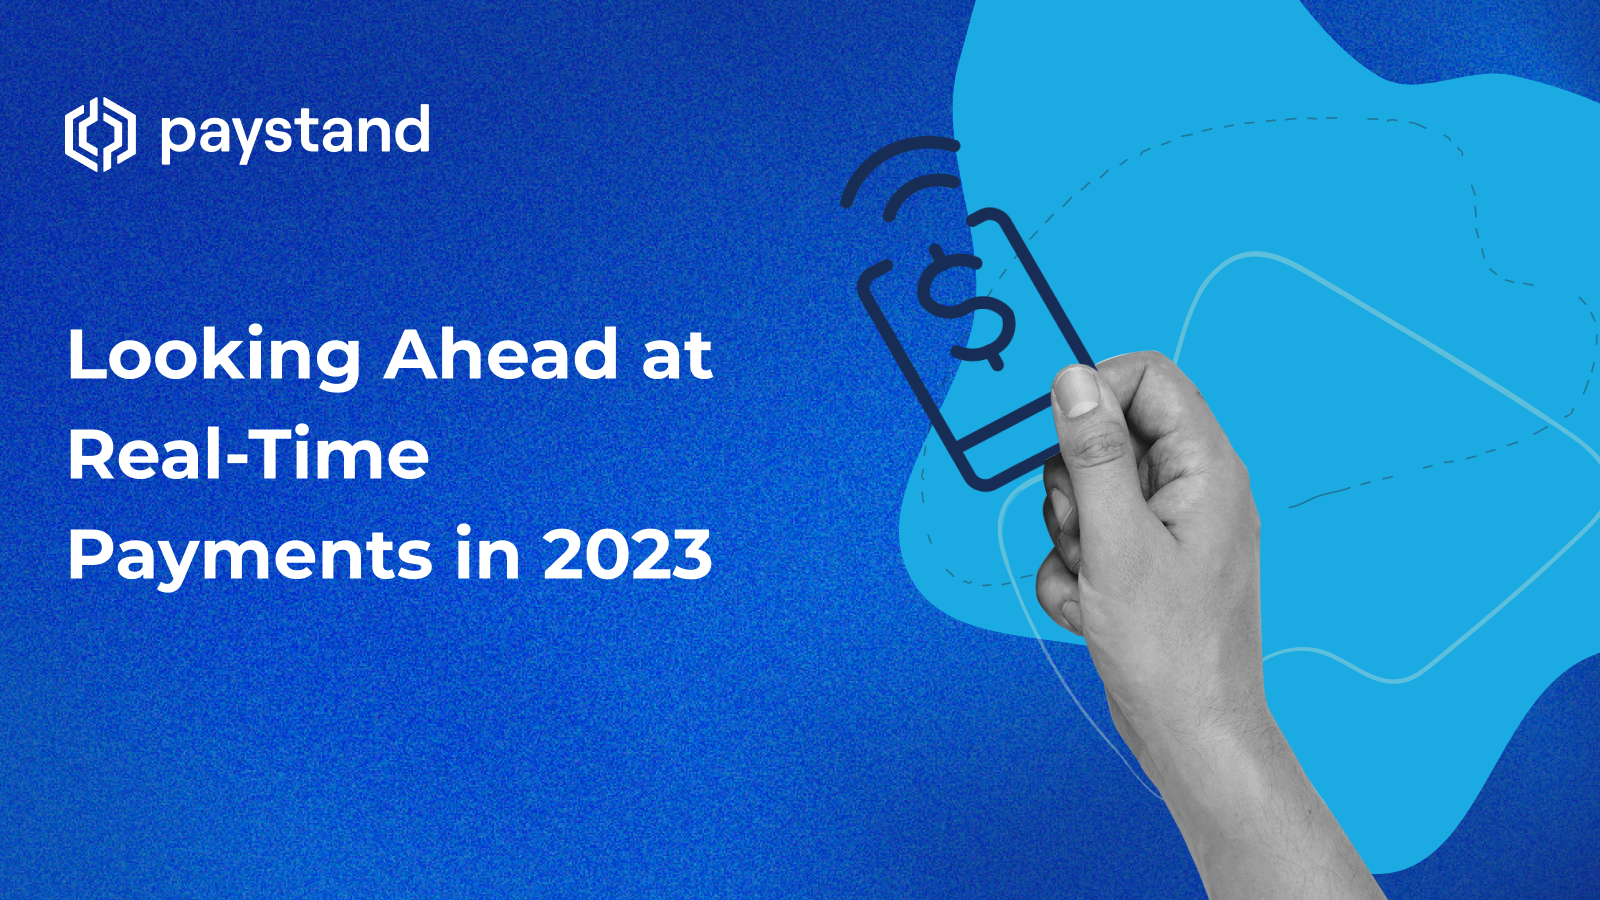 Looking Ahead at Real-Time Payments in 2023